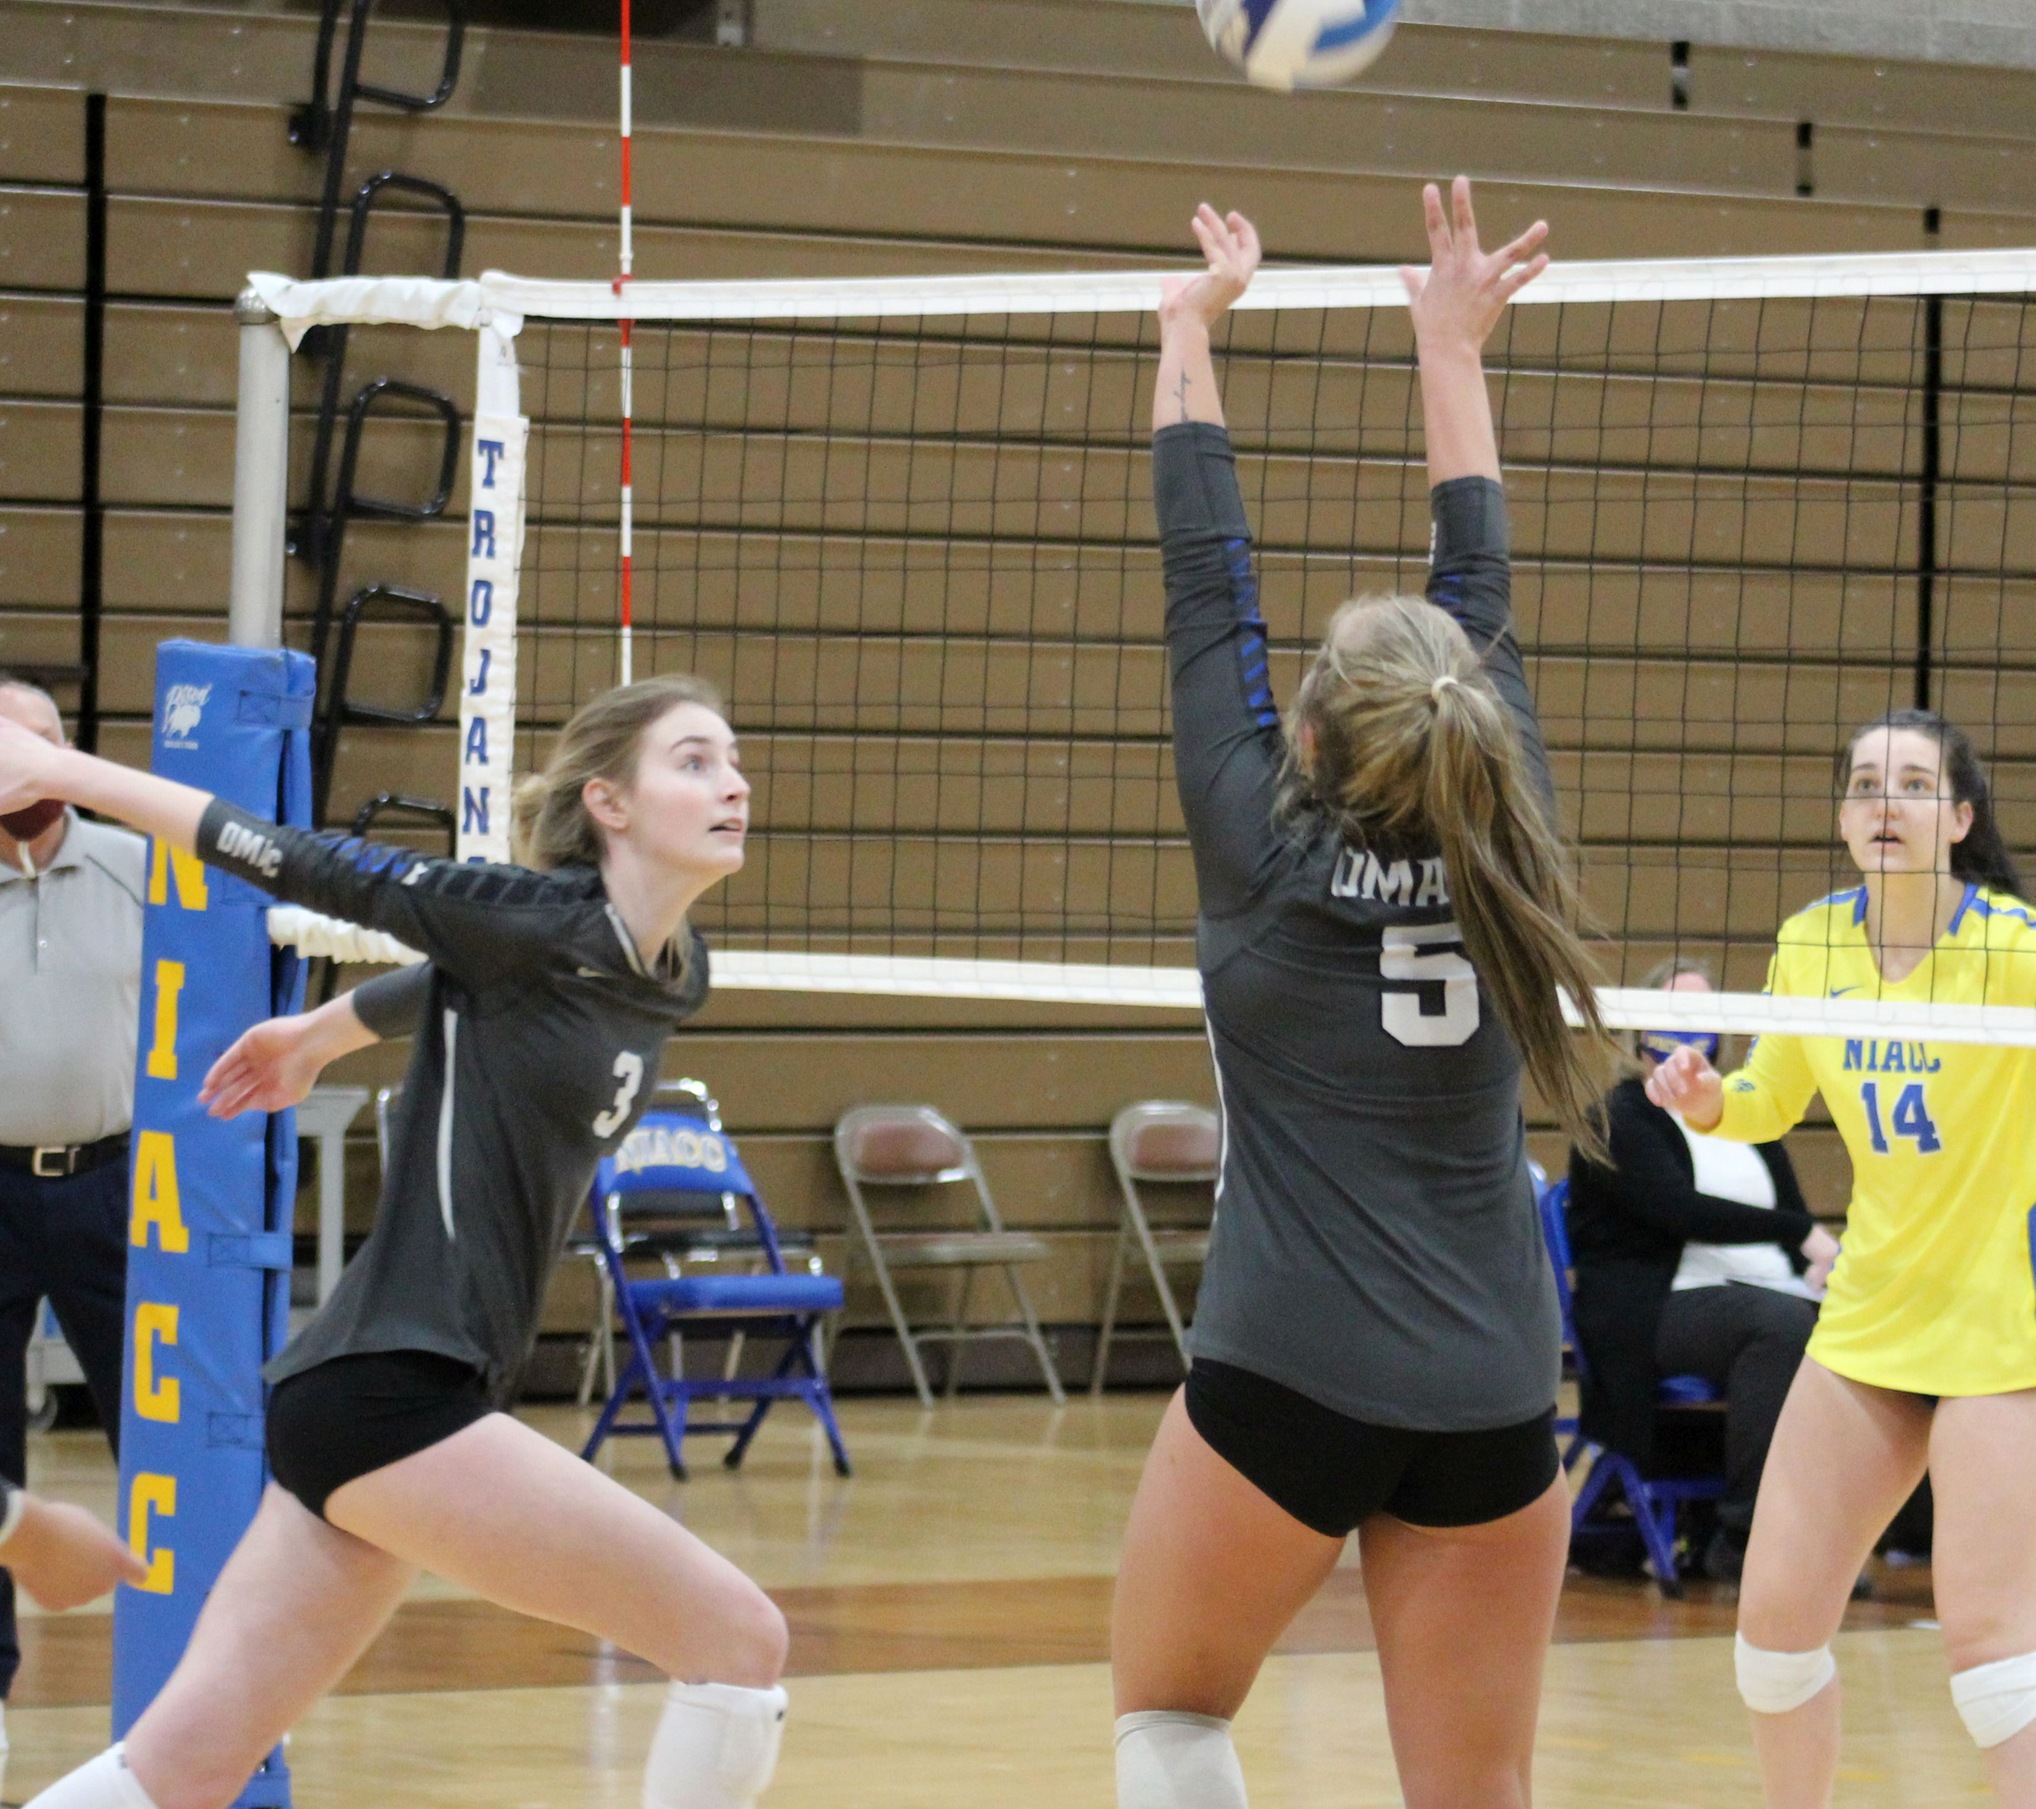 DMACC volleyball team sweeps NIACC for fifth consecutive win